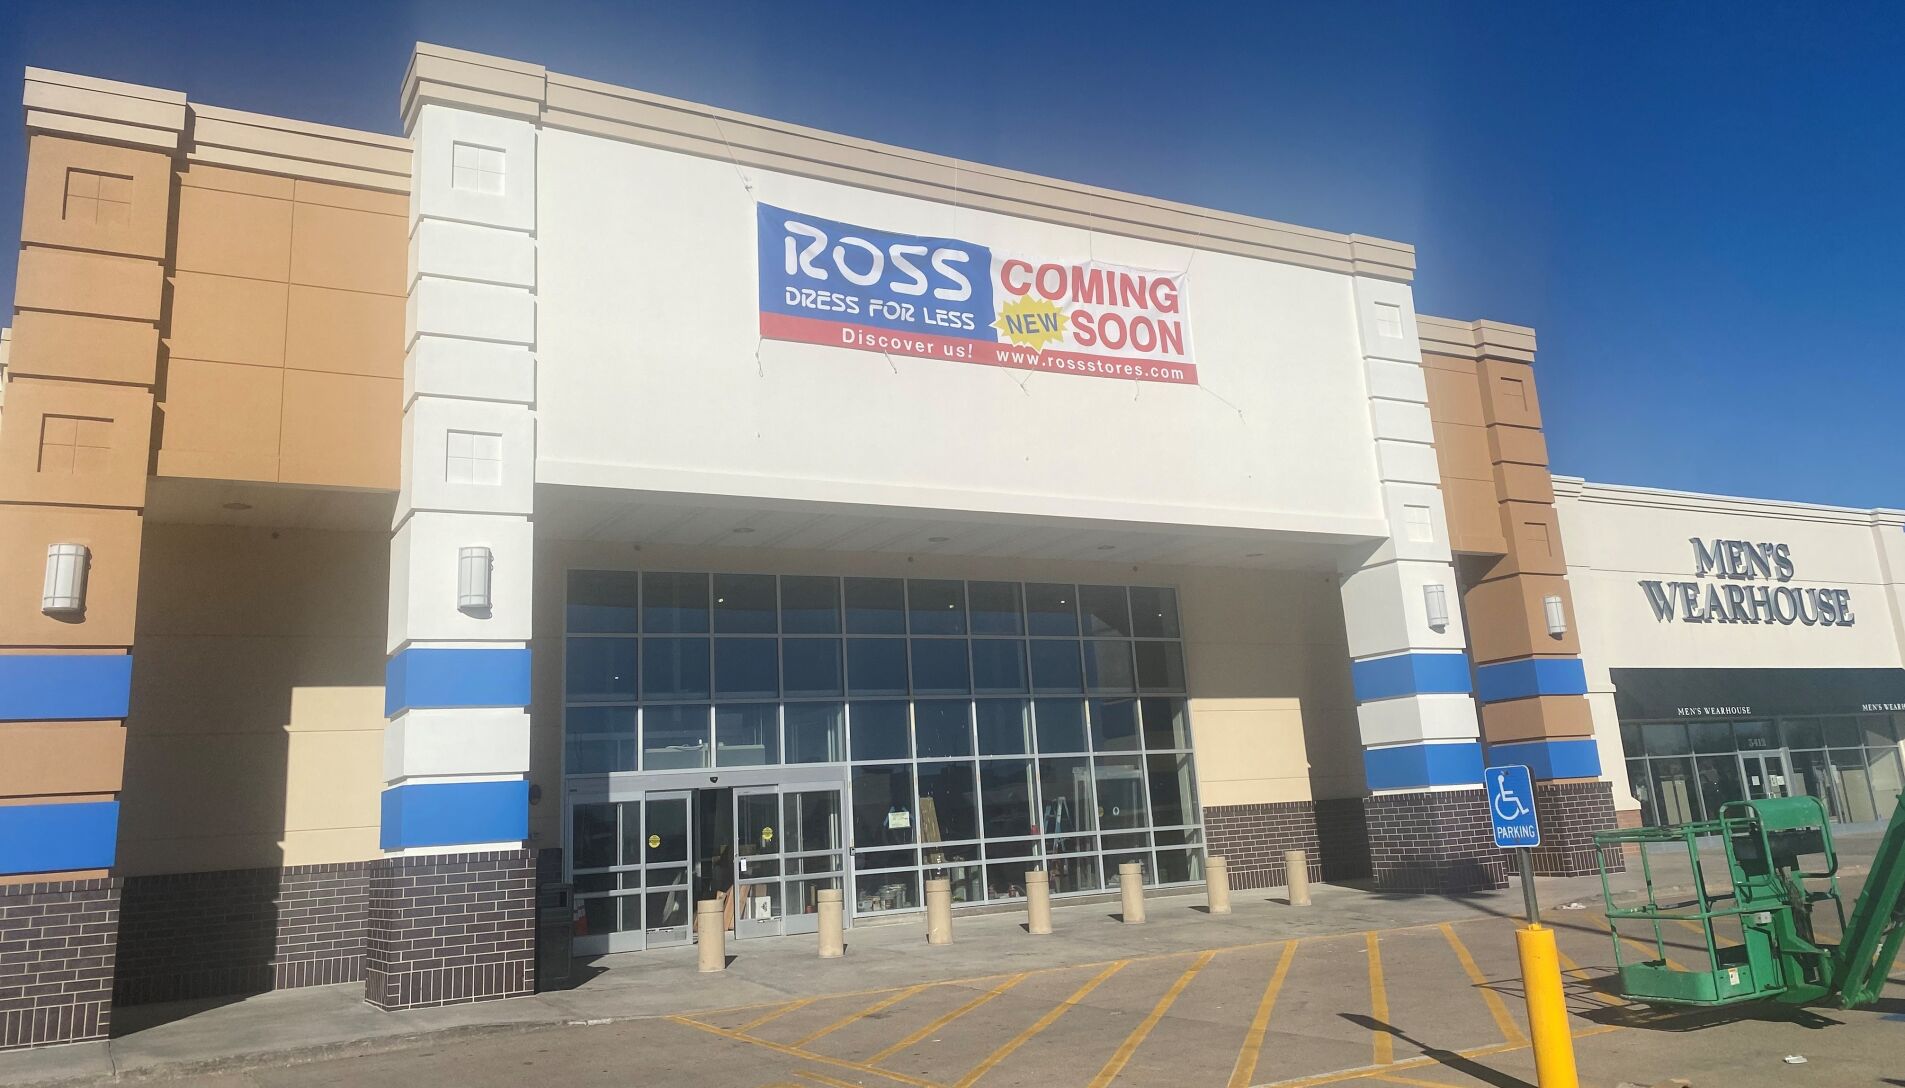 Ross Dress for Less clothing store coming to Victor NY